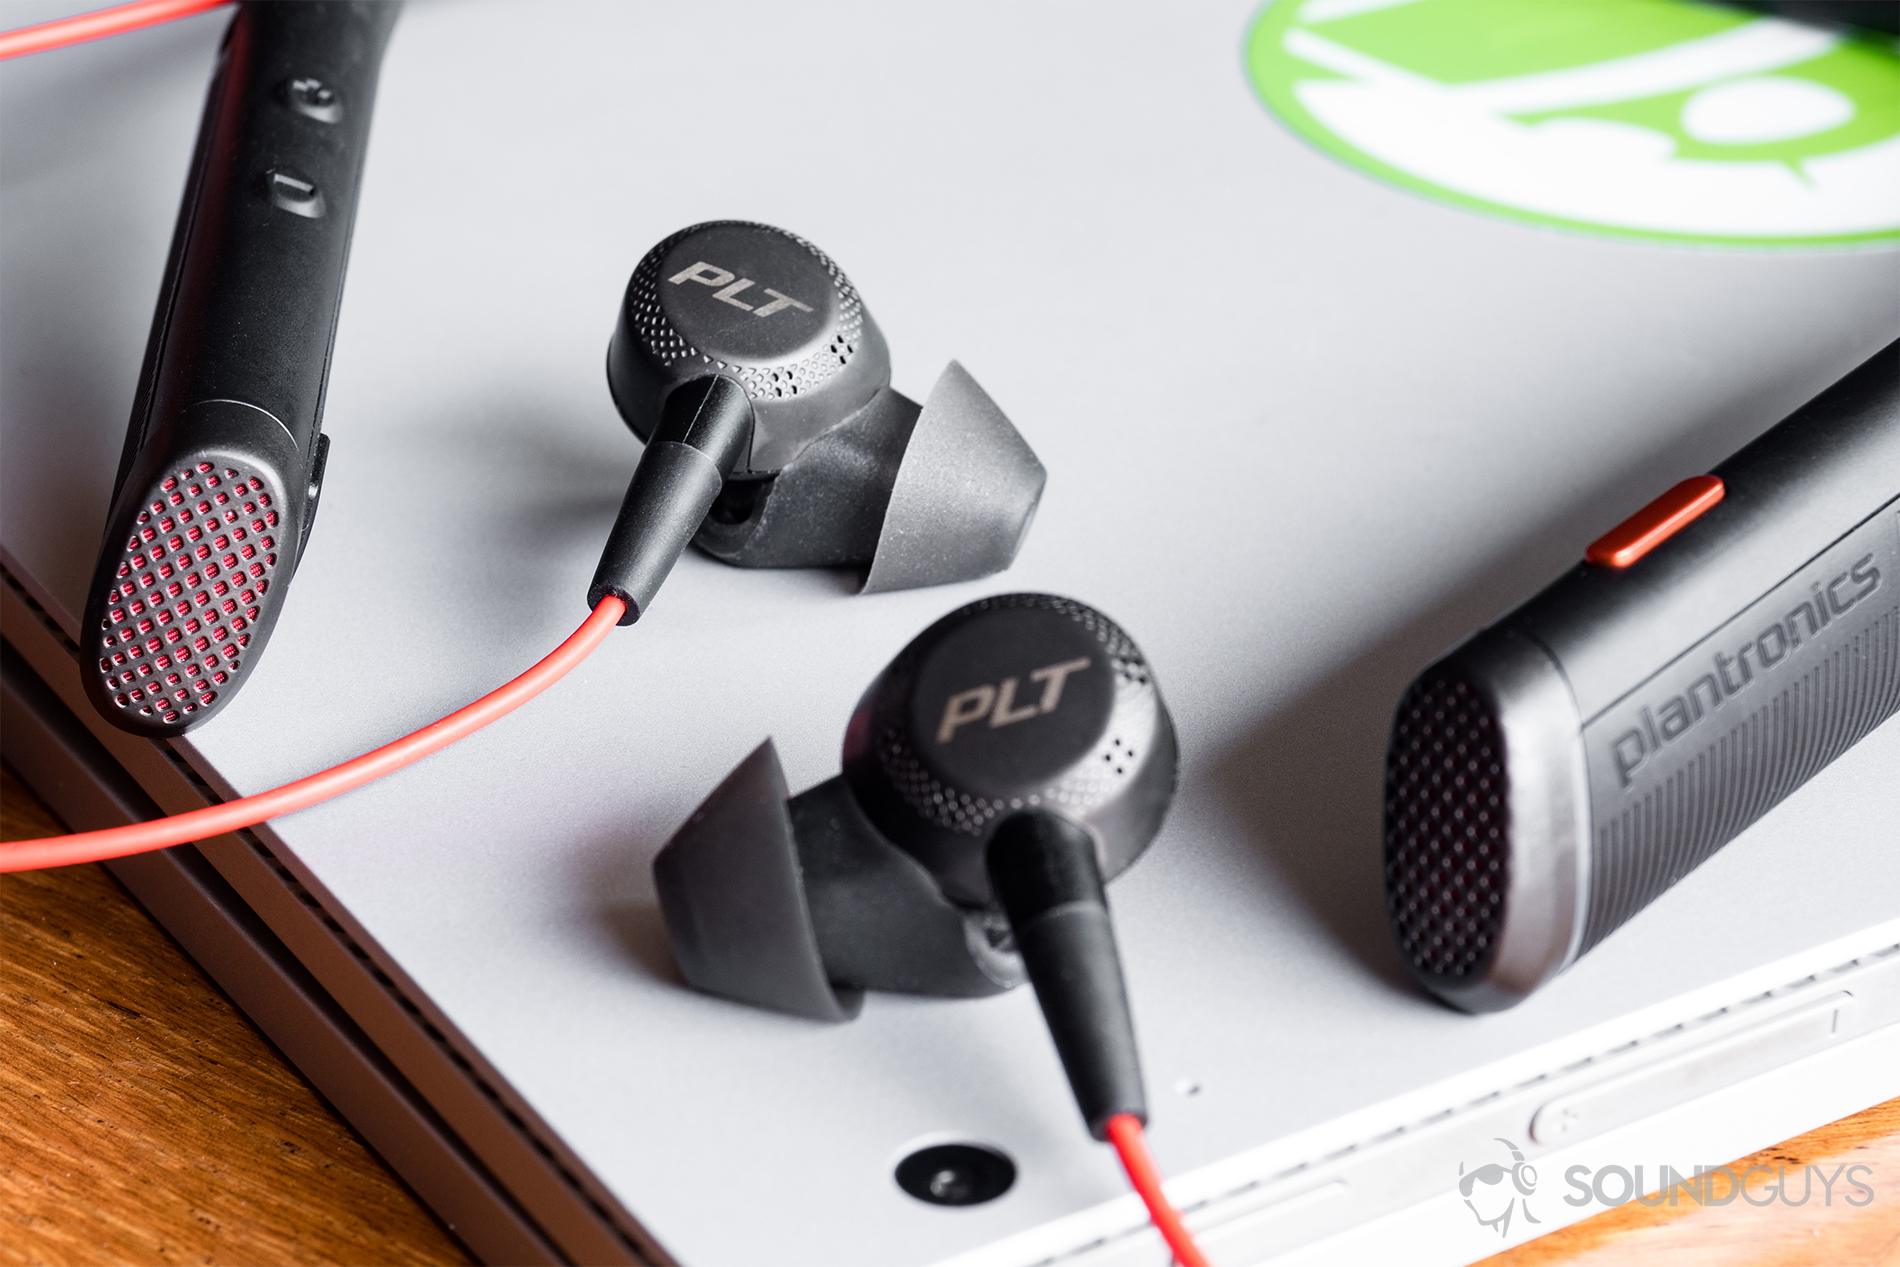 As one may expect, the Plantronics Voyager 6200 UC earphones favor vocal-heavy music. Bass reproduction is the weakest aspect of the earphones' sound. Pictured: The Plantronics Voyager 6200 UC on top of a Microsoft Surface Book. The lower-left and right diagonal sections are a wood table, and the headset rests atop the laptop with teh earbuds between the ends of the neckband.